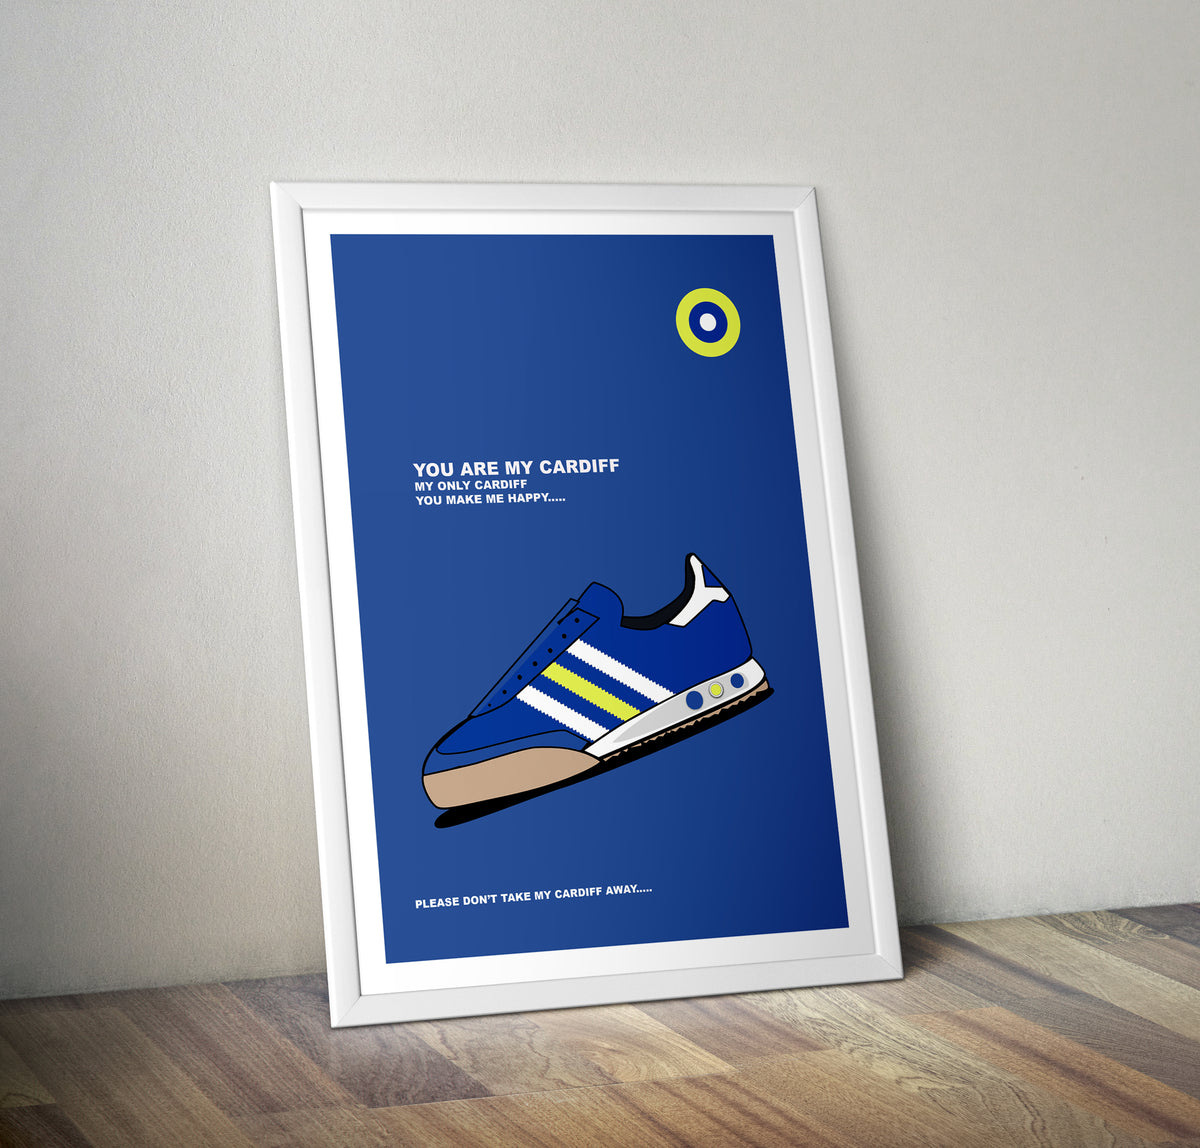 Cardiff City FC Crest Poster Officially Licensed Product A4 